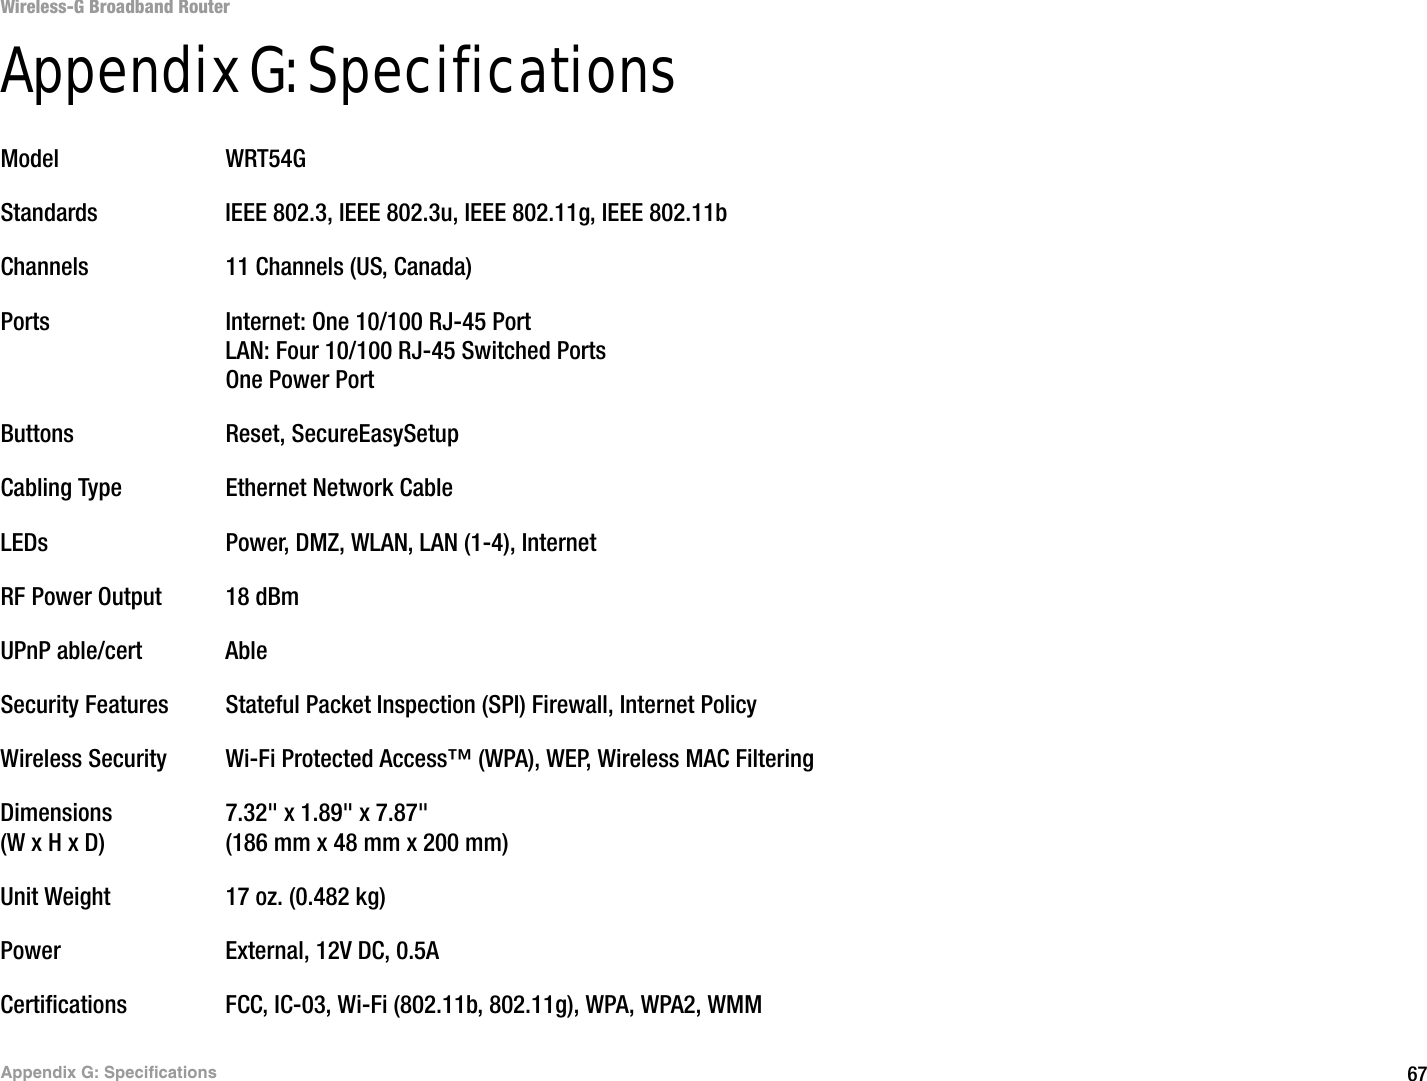 67Appendix G: SpecificationsWireless-G Broadband RouterAppendix G: SpecificationsModel WRT54GStandards IEEE 802.3, IEEE 802.3u, IEEE 802.11g, IEEE 802.11bChannels 11 Channels (US, Canada)Ports Internet: One 10/100 RJ-45 PortLAN: Four 10/100 RJ-45 Switched PortsOne Power PortButtons Reset, SecureEasySetupCabling Type Ethernet Network CableLEDs Power, DMZ, WLAN, LAN (1-4), InternetRF Power Output 18 dBmUPnP able/cert AbleSecurity Features Stateful Packet Inspection (SPI) Firewall, Internet PolicyWireless Security Wi-Fi Protected Access™ (WPA), WEP, Wireless MAC FilteringDimensions 7.32&quot; x 1.89&quot; x 7.87&quot;(W x H x D) (186 mm x 48 mm x 200 mm)Unit Weight 17 oz. (0.482 kg)Power External, 12V DC, 0.5ACertifications FCC, IC-03, Wi-Fi (802.11b, 802.11g), WPA, WPA2, WMM